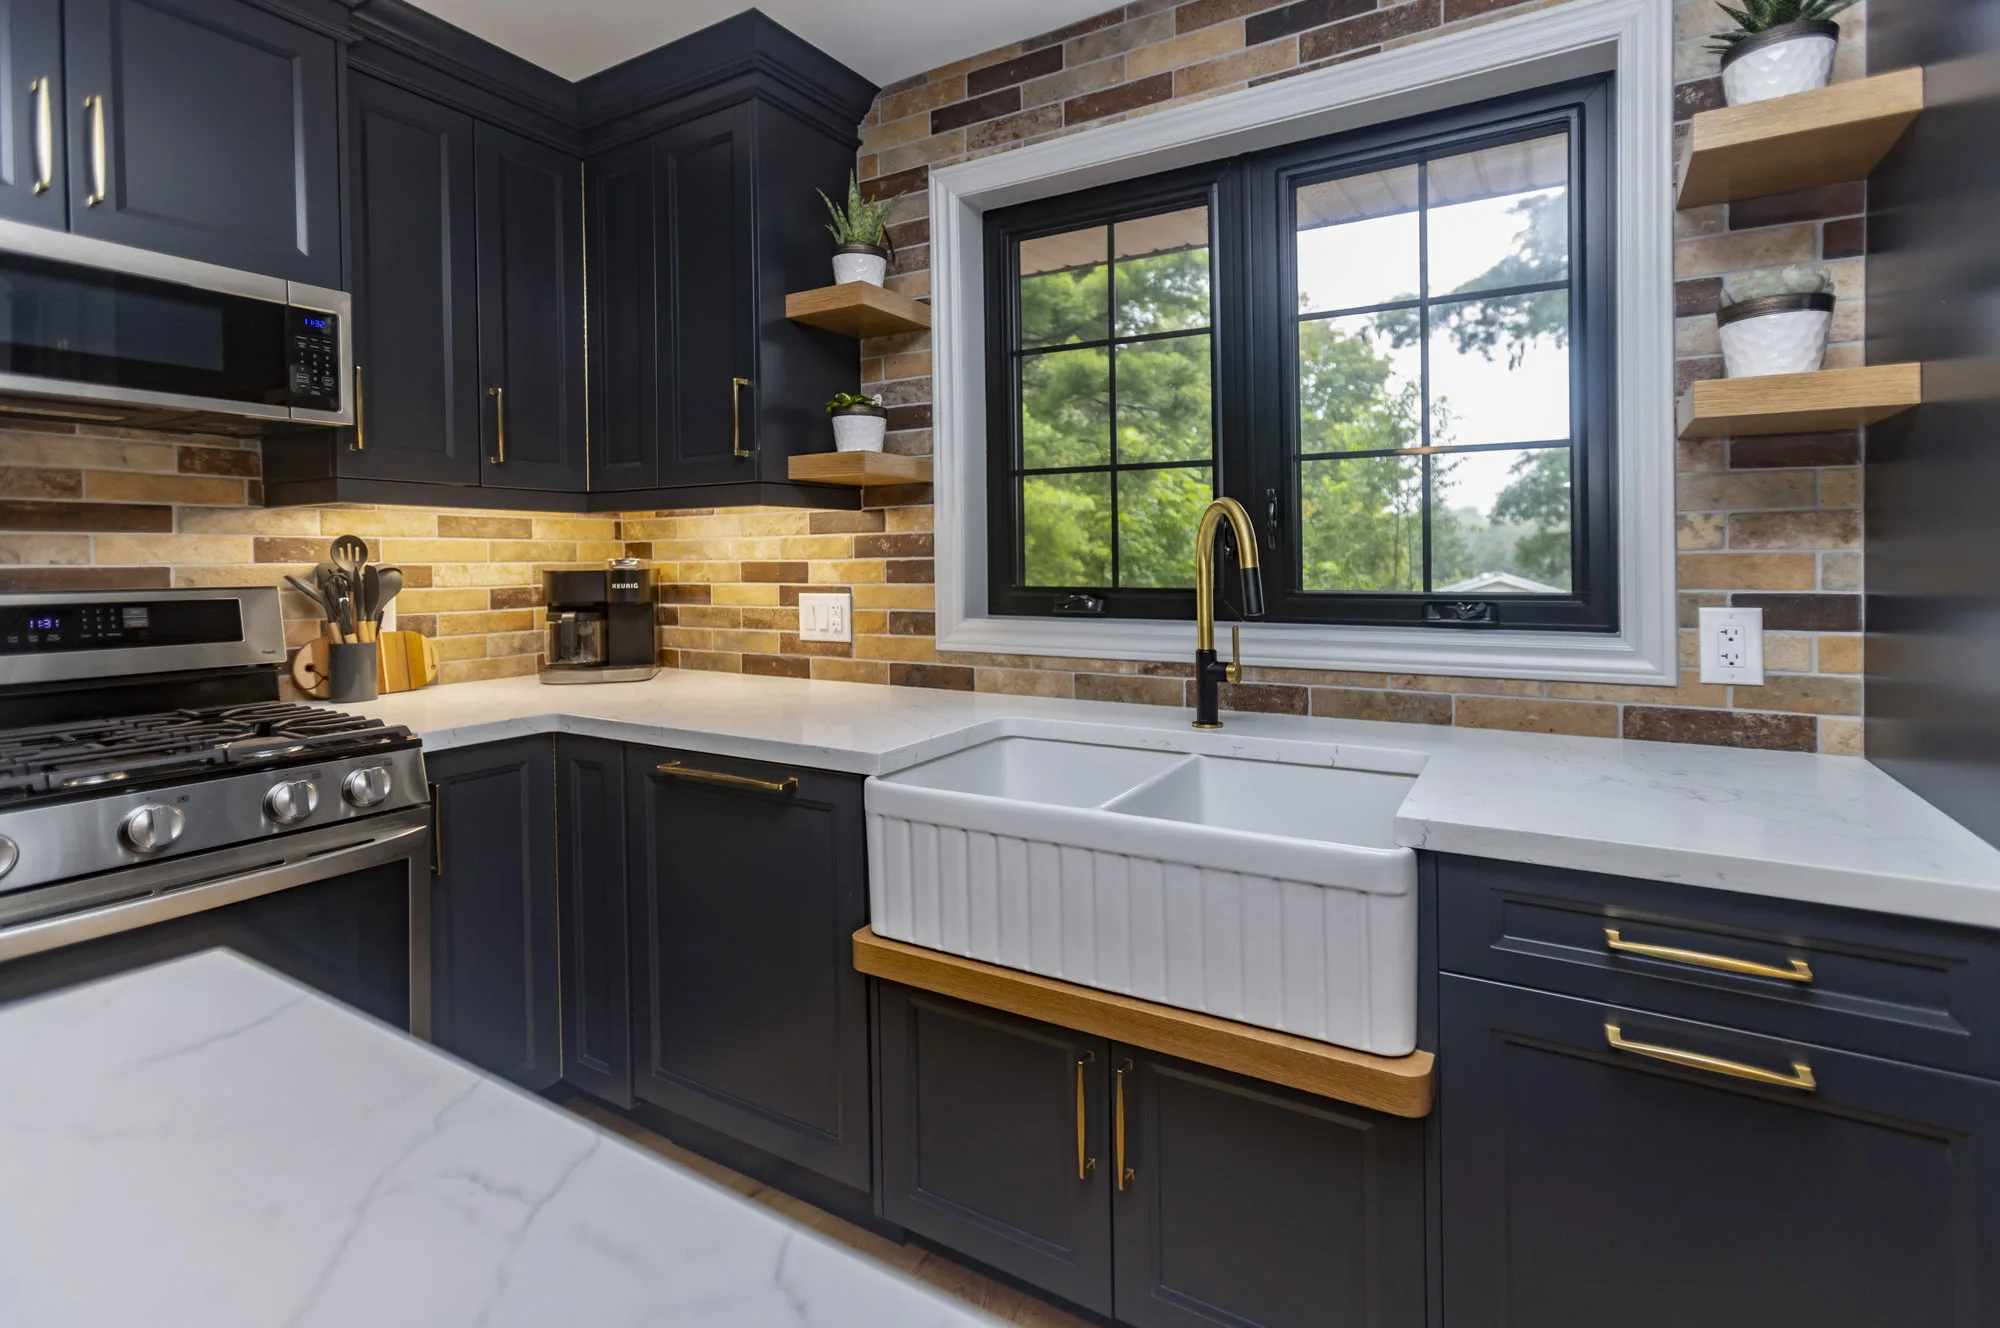 Kitchen with dark navy uppers and lowers with gold hardware and stainless steel appliances along with a deep white double sink with a gold tap